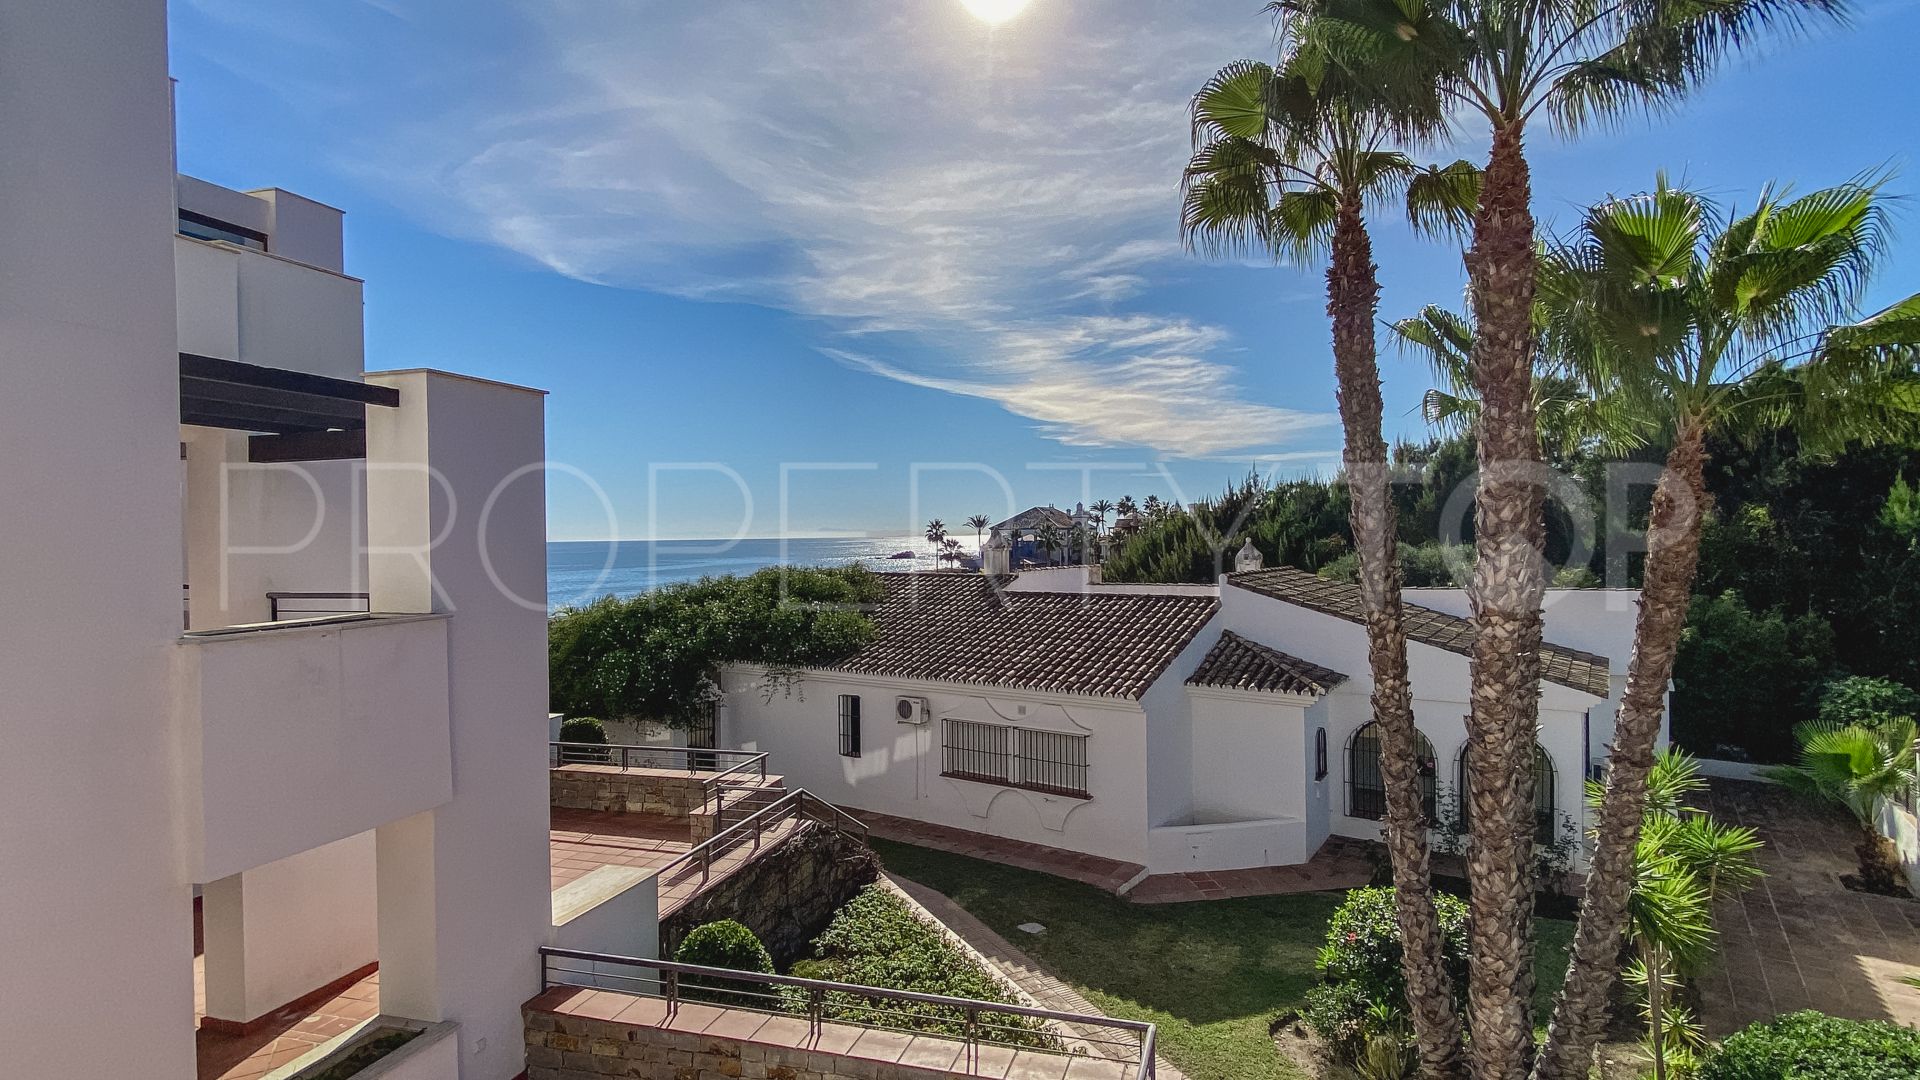 For sale apartment in Casares del Mar with 1 bedroom